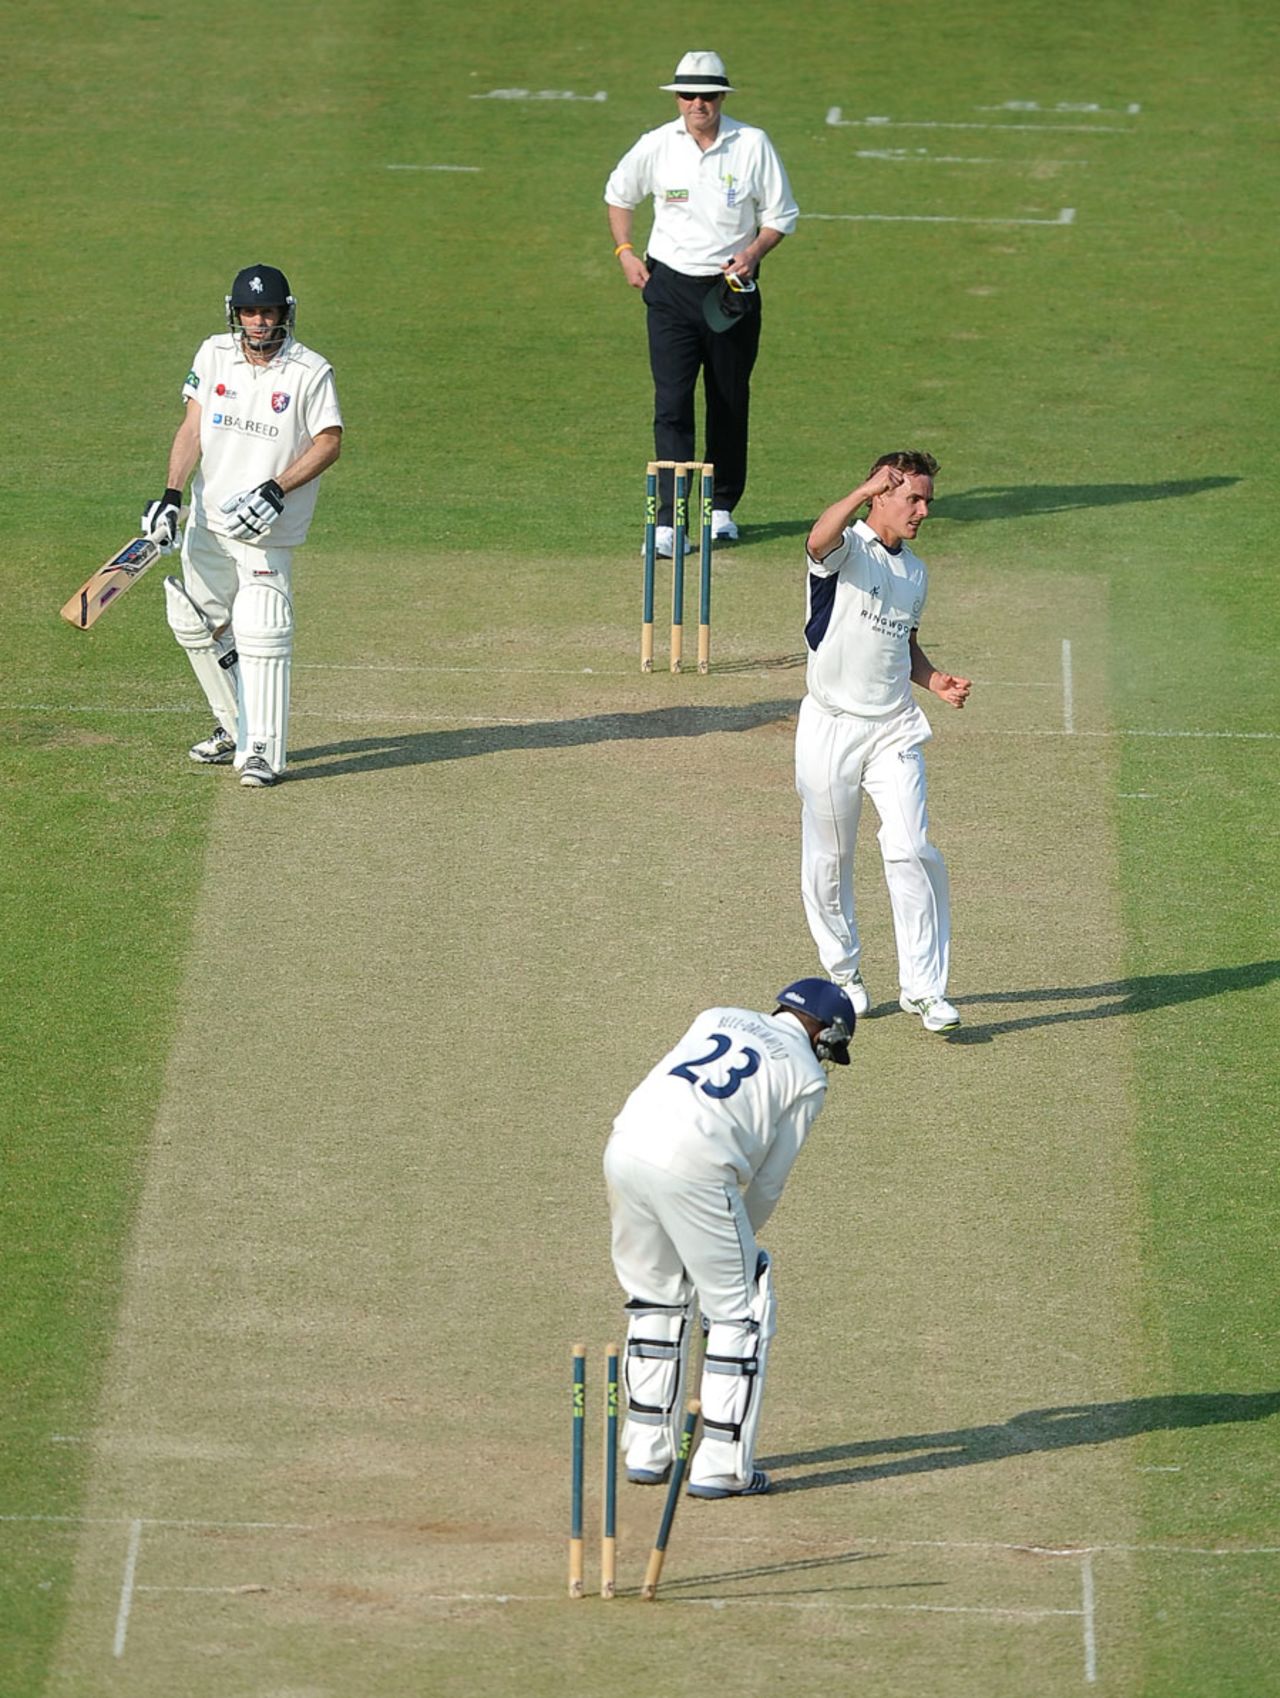 David Griffiths pegged back Daniel Bell-Drummond's off stump, Hampshire v Kent, County Championship, Division One, Ageas Bowl, 2nd day, June 6, 2013